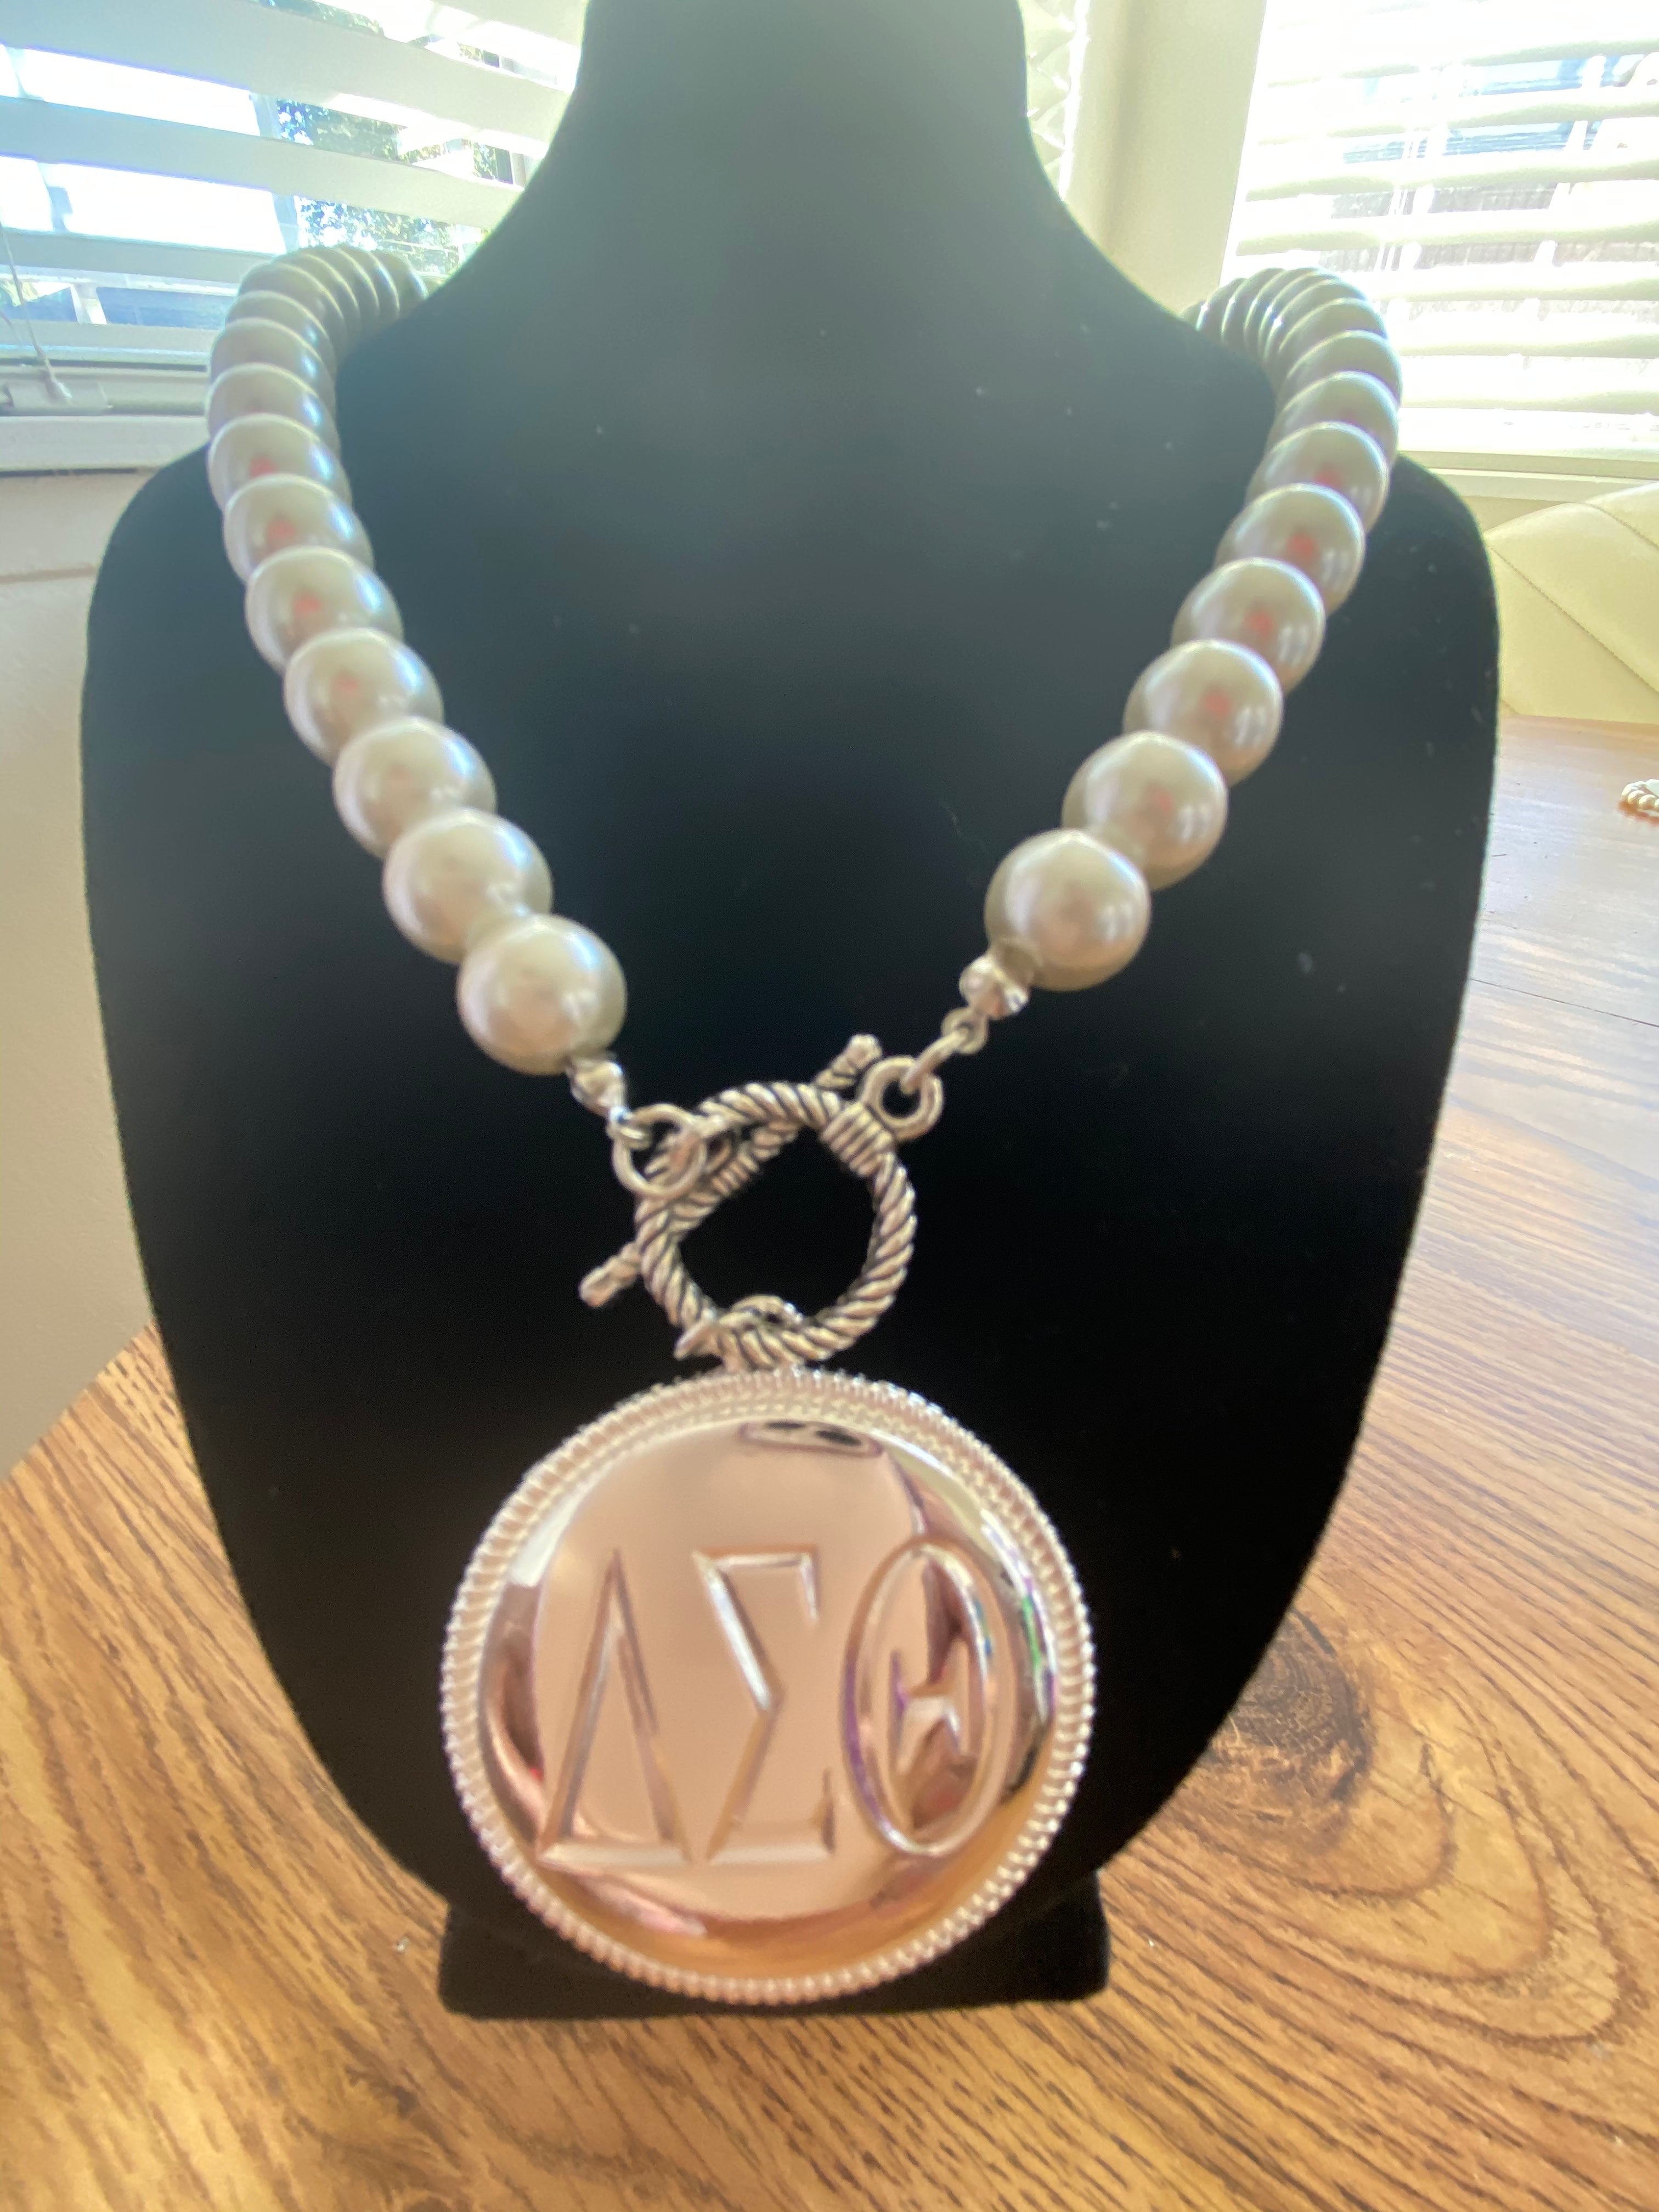 A Beautiful Delta logo attached to Pearls